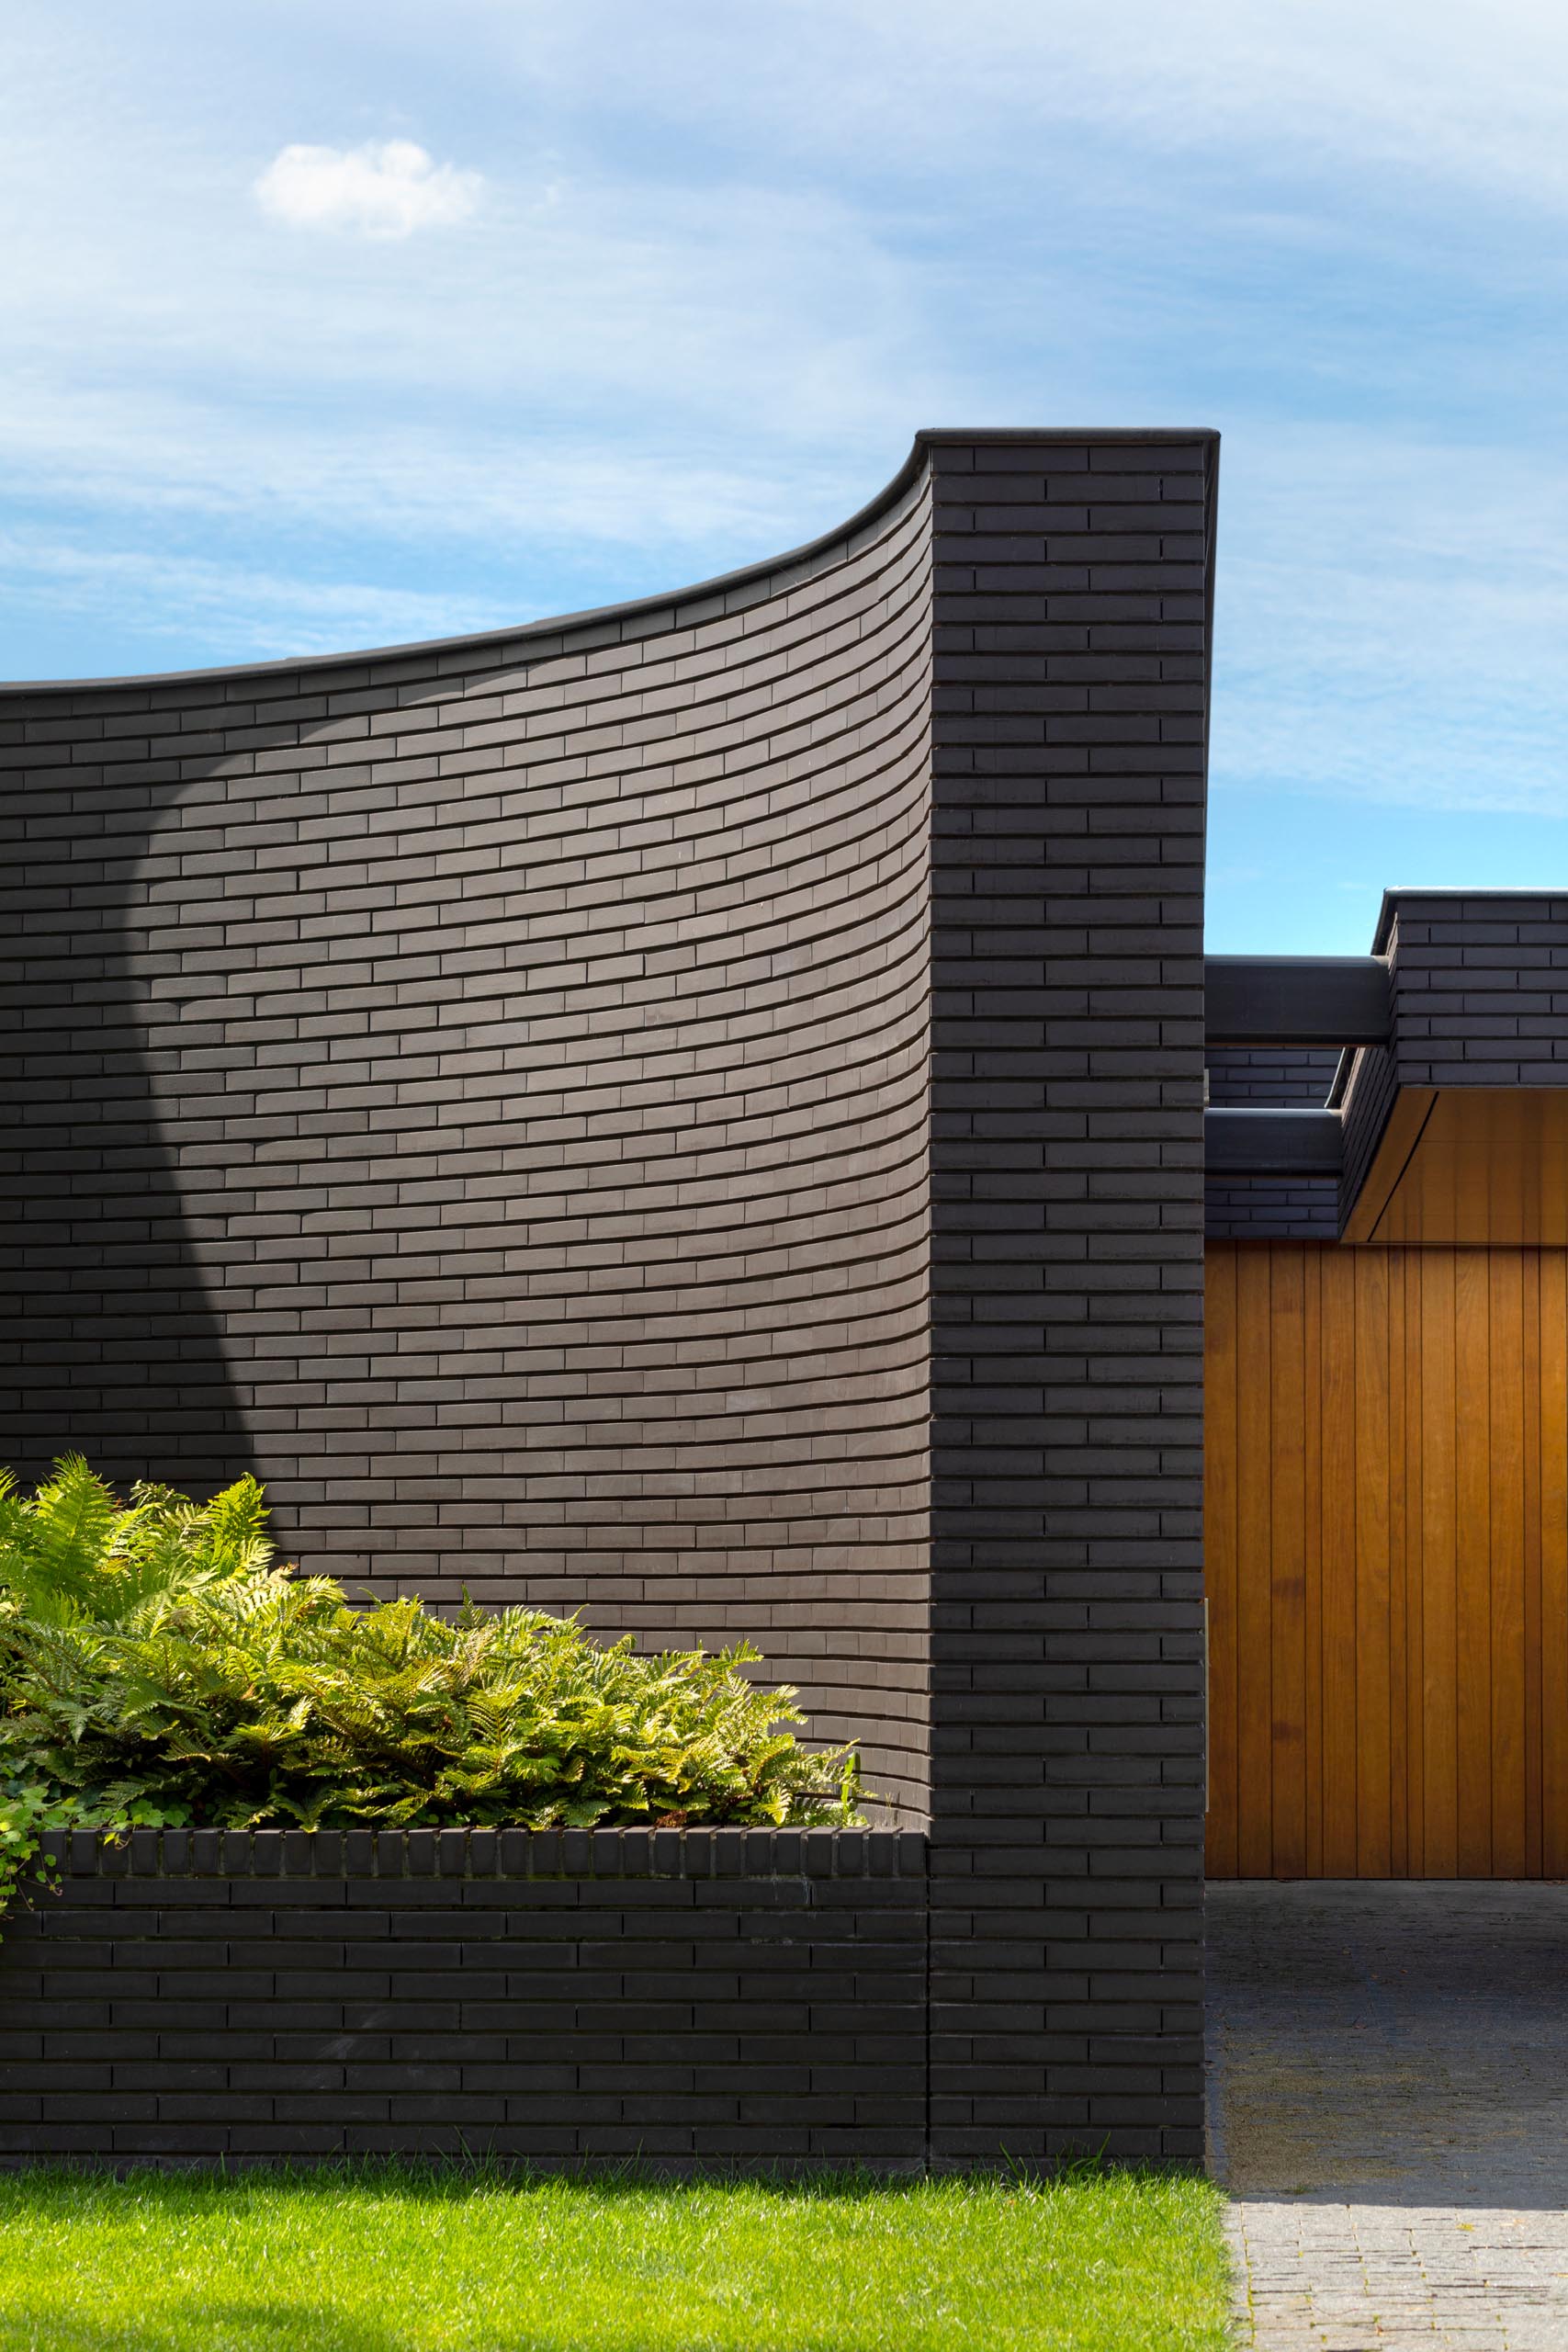 The black brick facade of this modern home features curves and has large integrated planters that highlight the lush greenery.